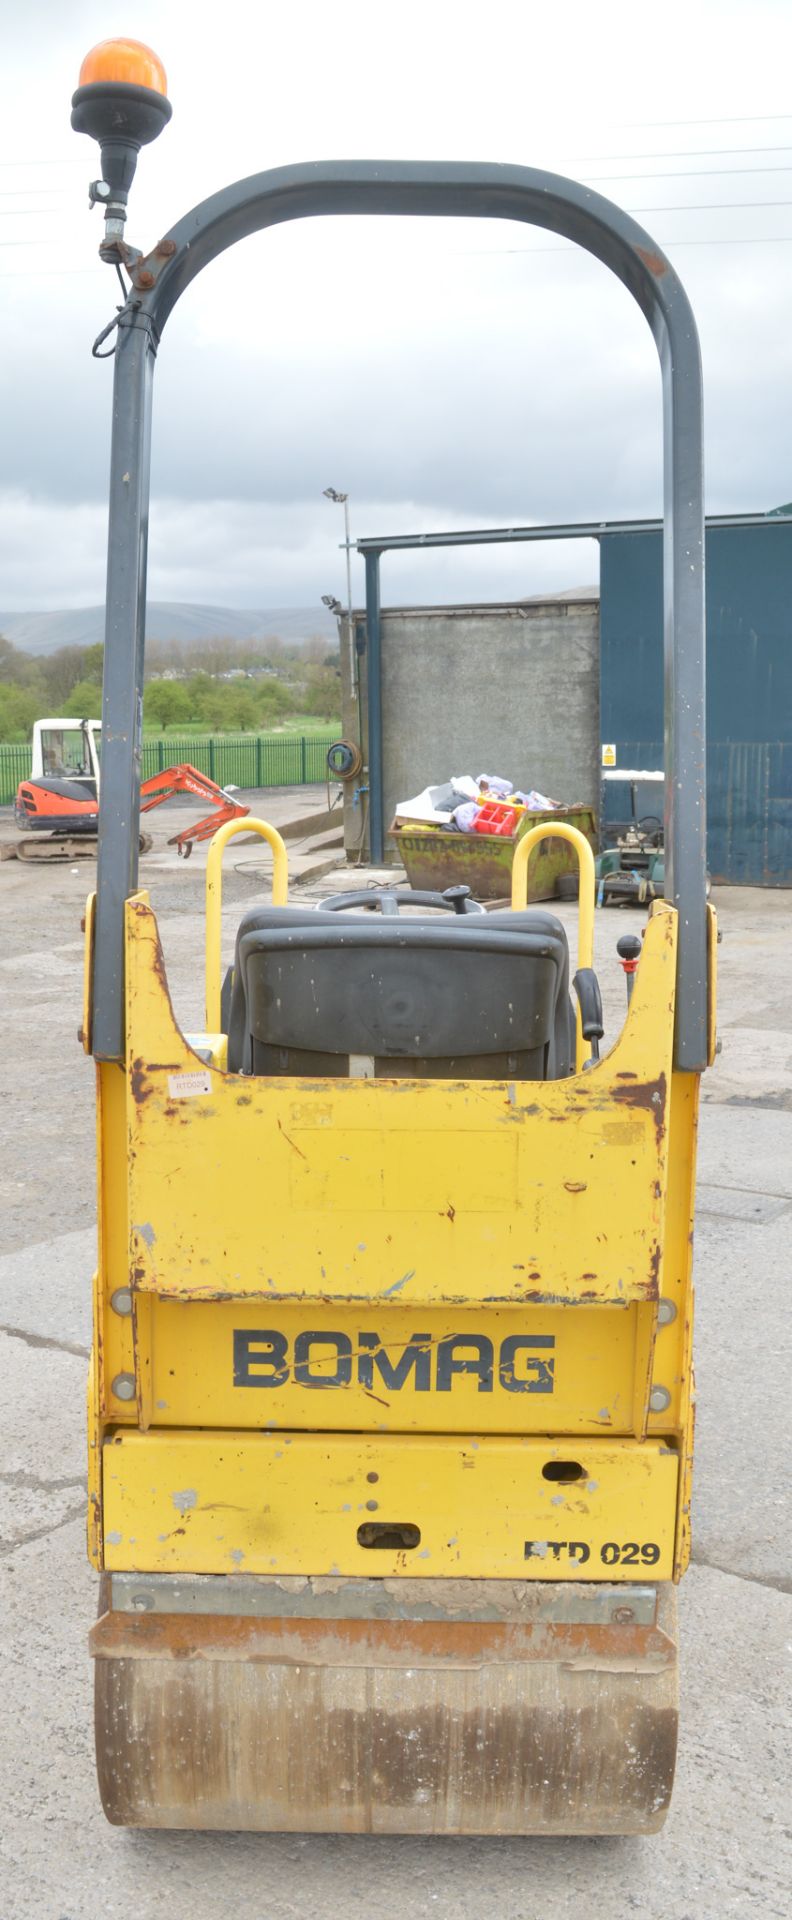 Bomag BW80AD-2 double drum ride on roller  Year: 2006 S/N: 426052 Recorded hours: 869 RTD029 - Image 5 of 7